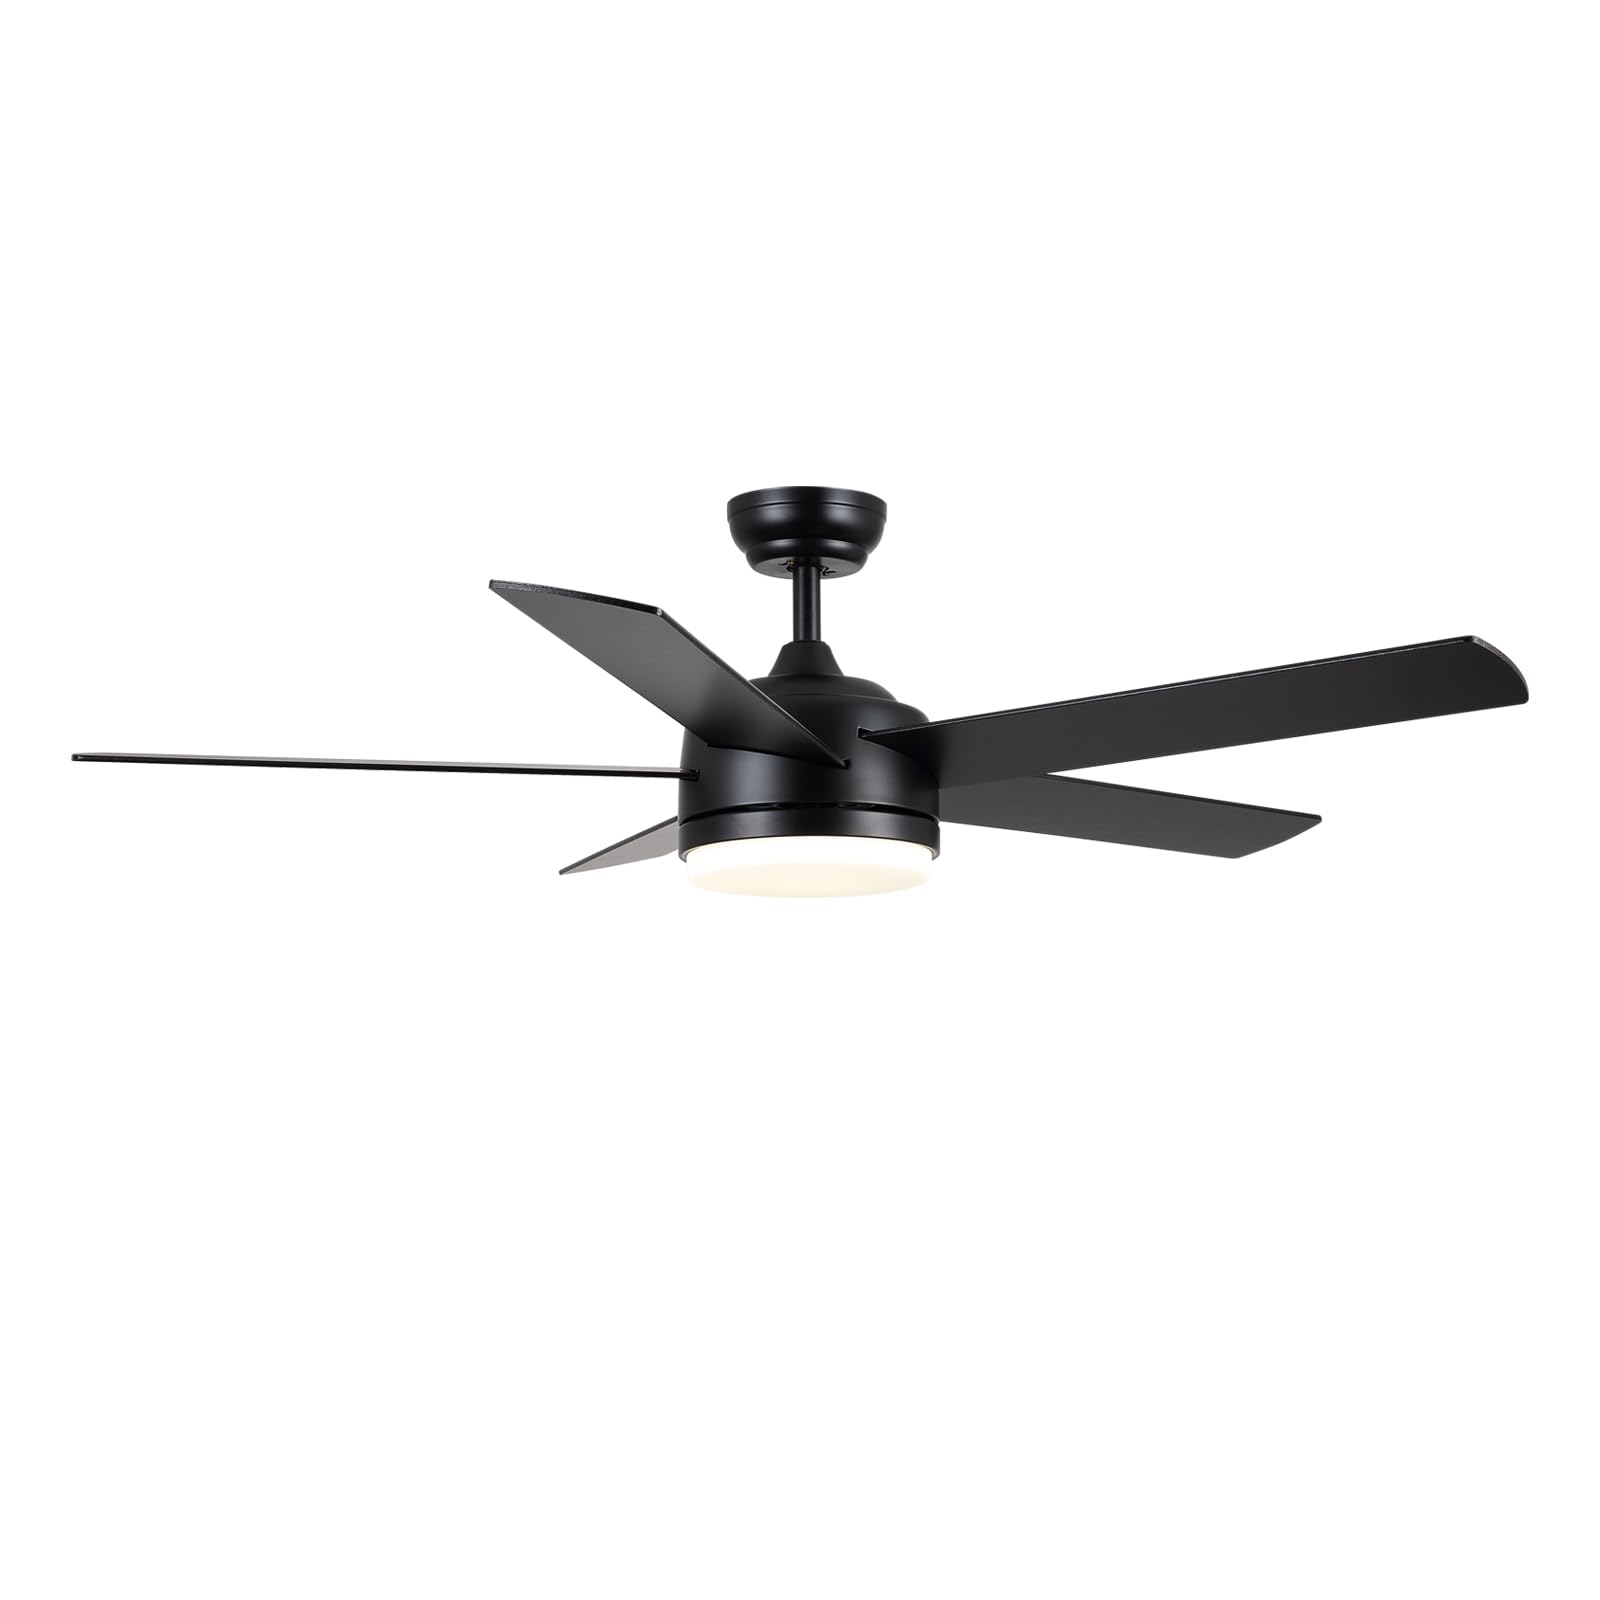 YUHAO 52 inch Black Ceiling Fan with Lights and Remote Control